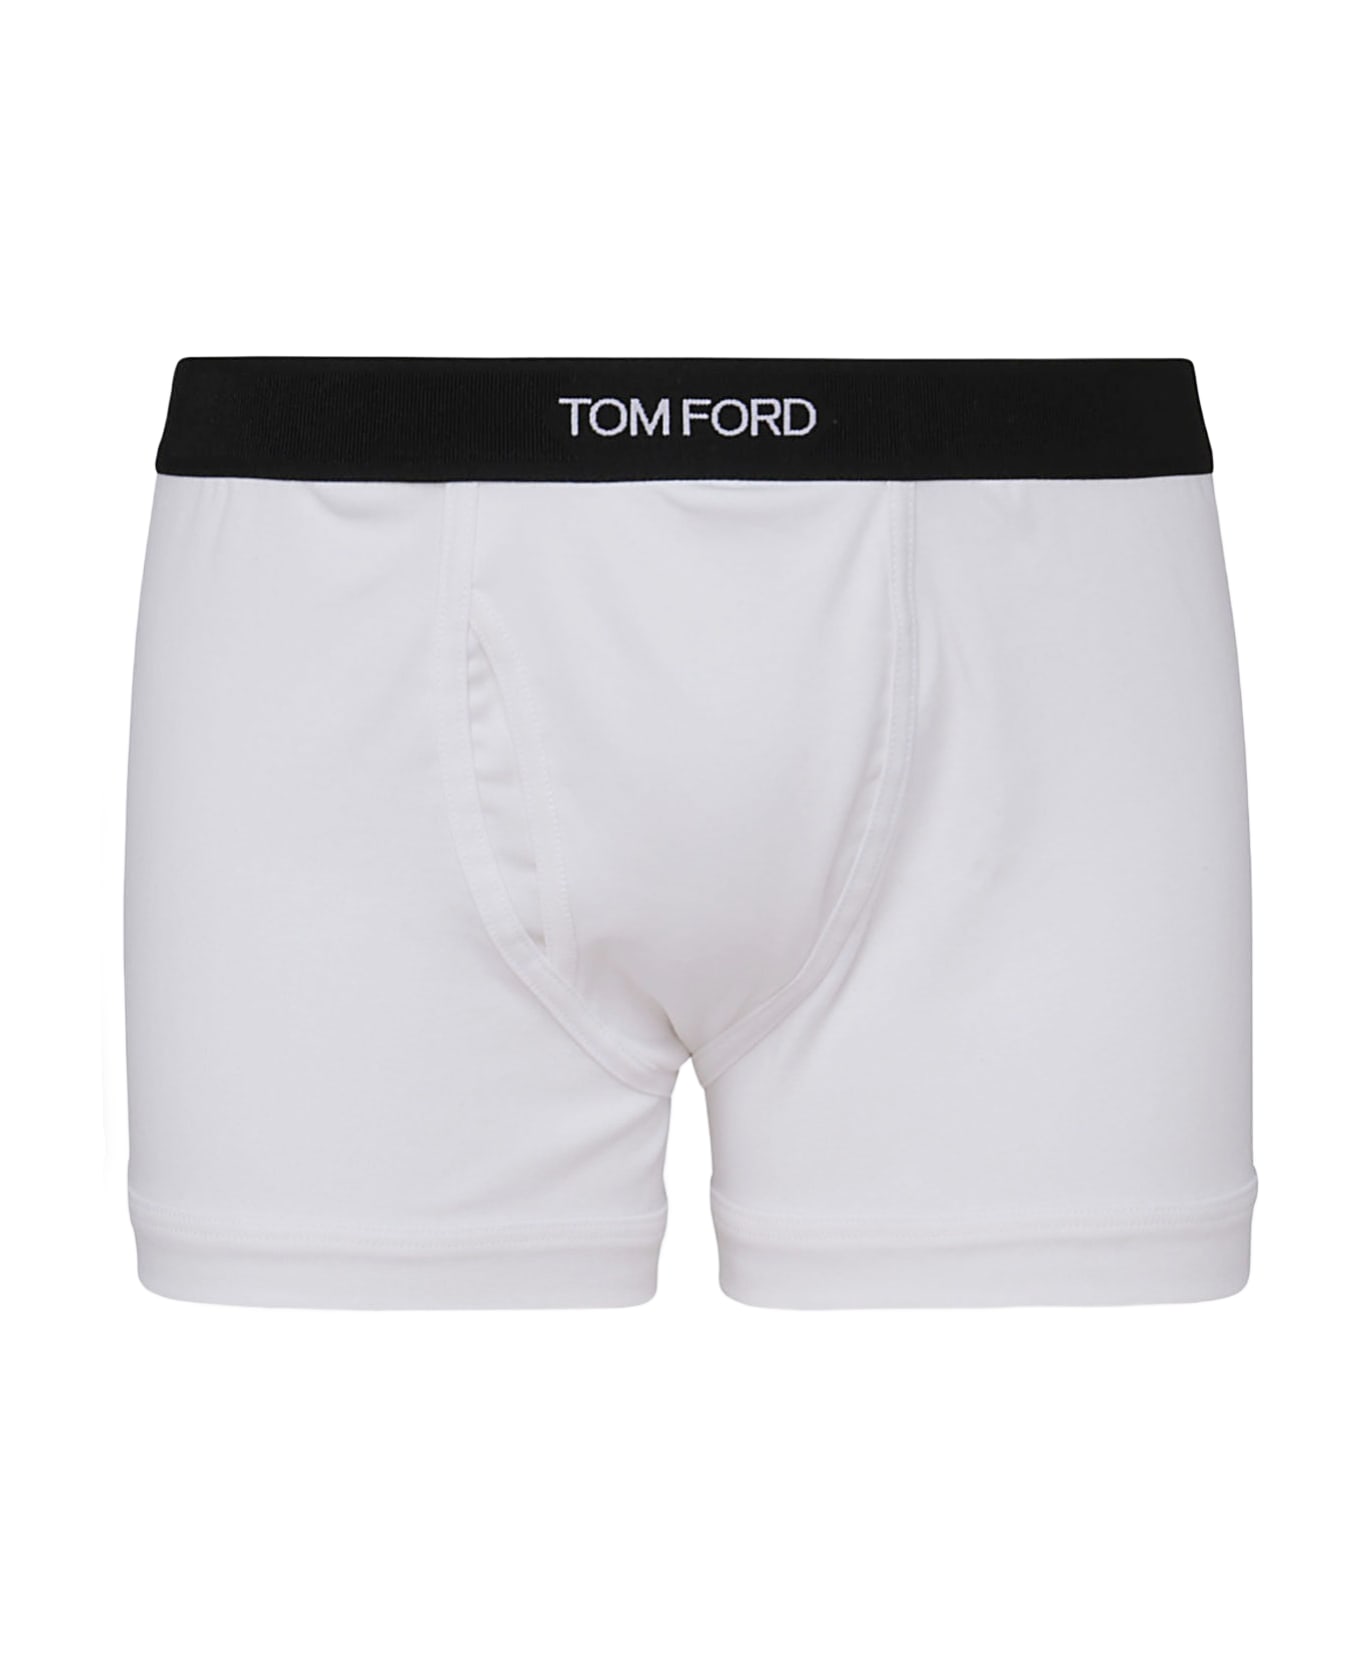 Tom Ford White Cotton Two Pack Boxers - White